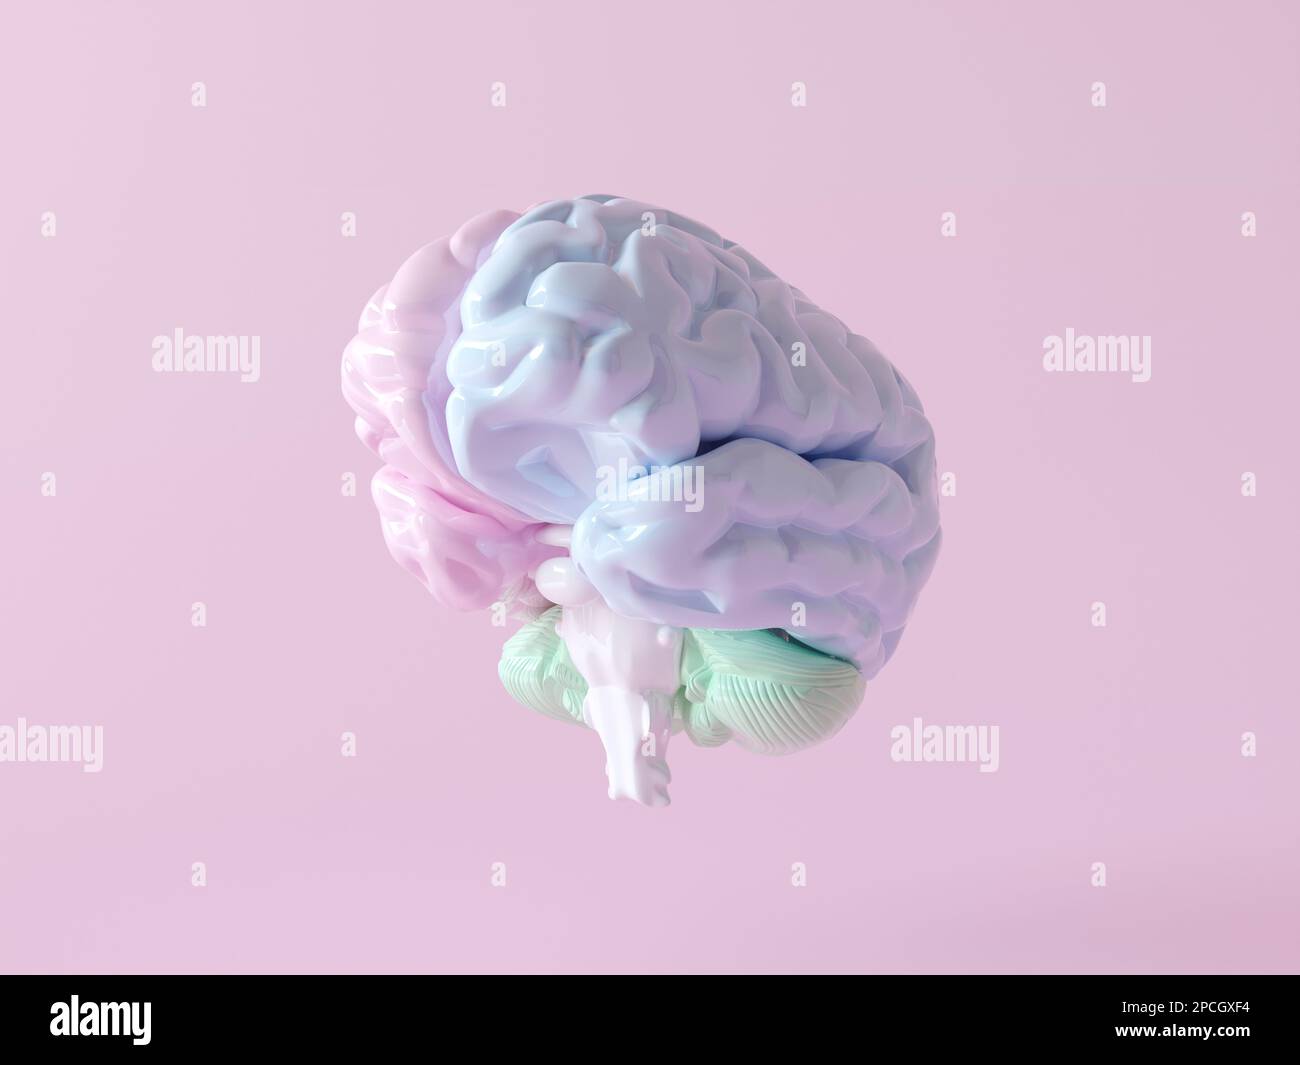 3D brain rendering illustration with left and right function and activity parts isolated on pastel pink background. Brain with subdivisions Stock Photo